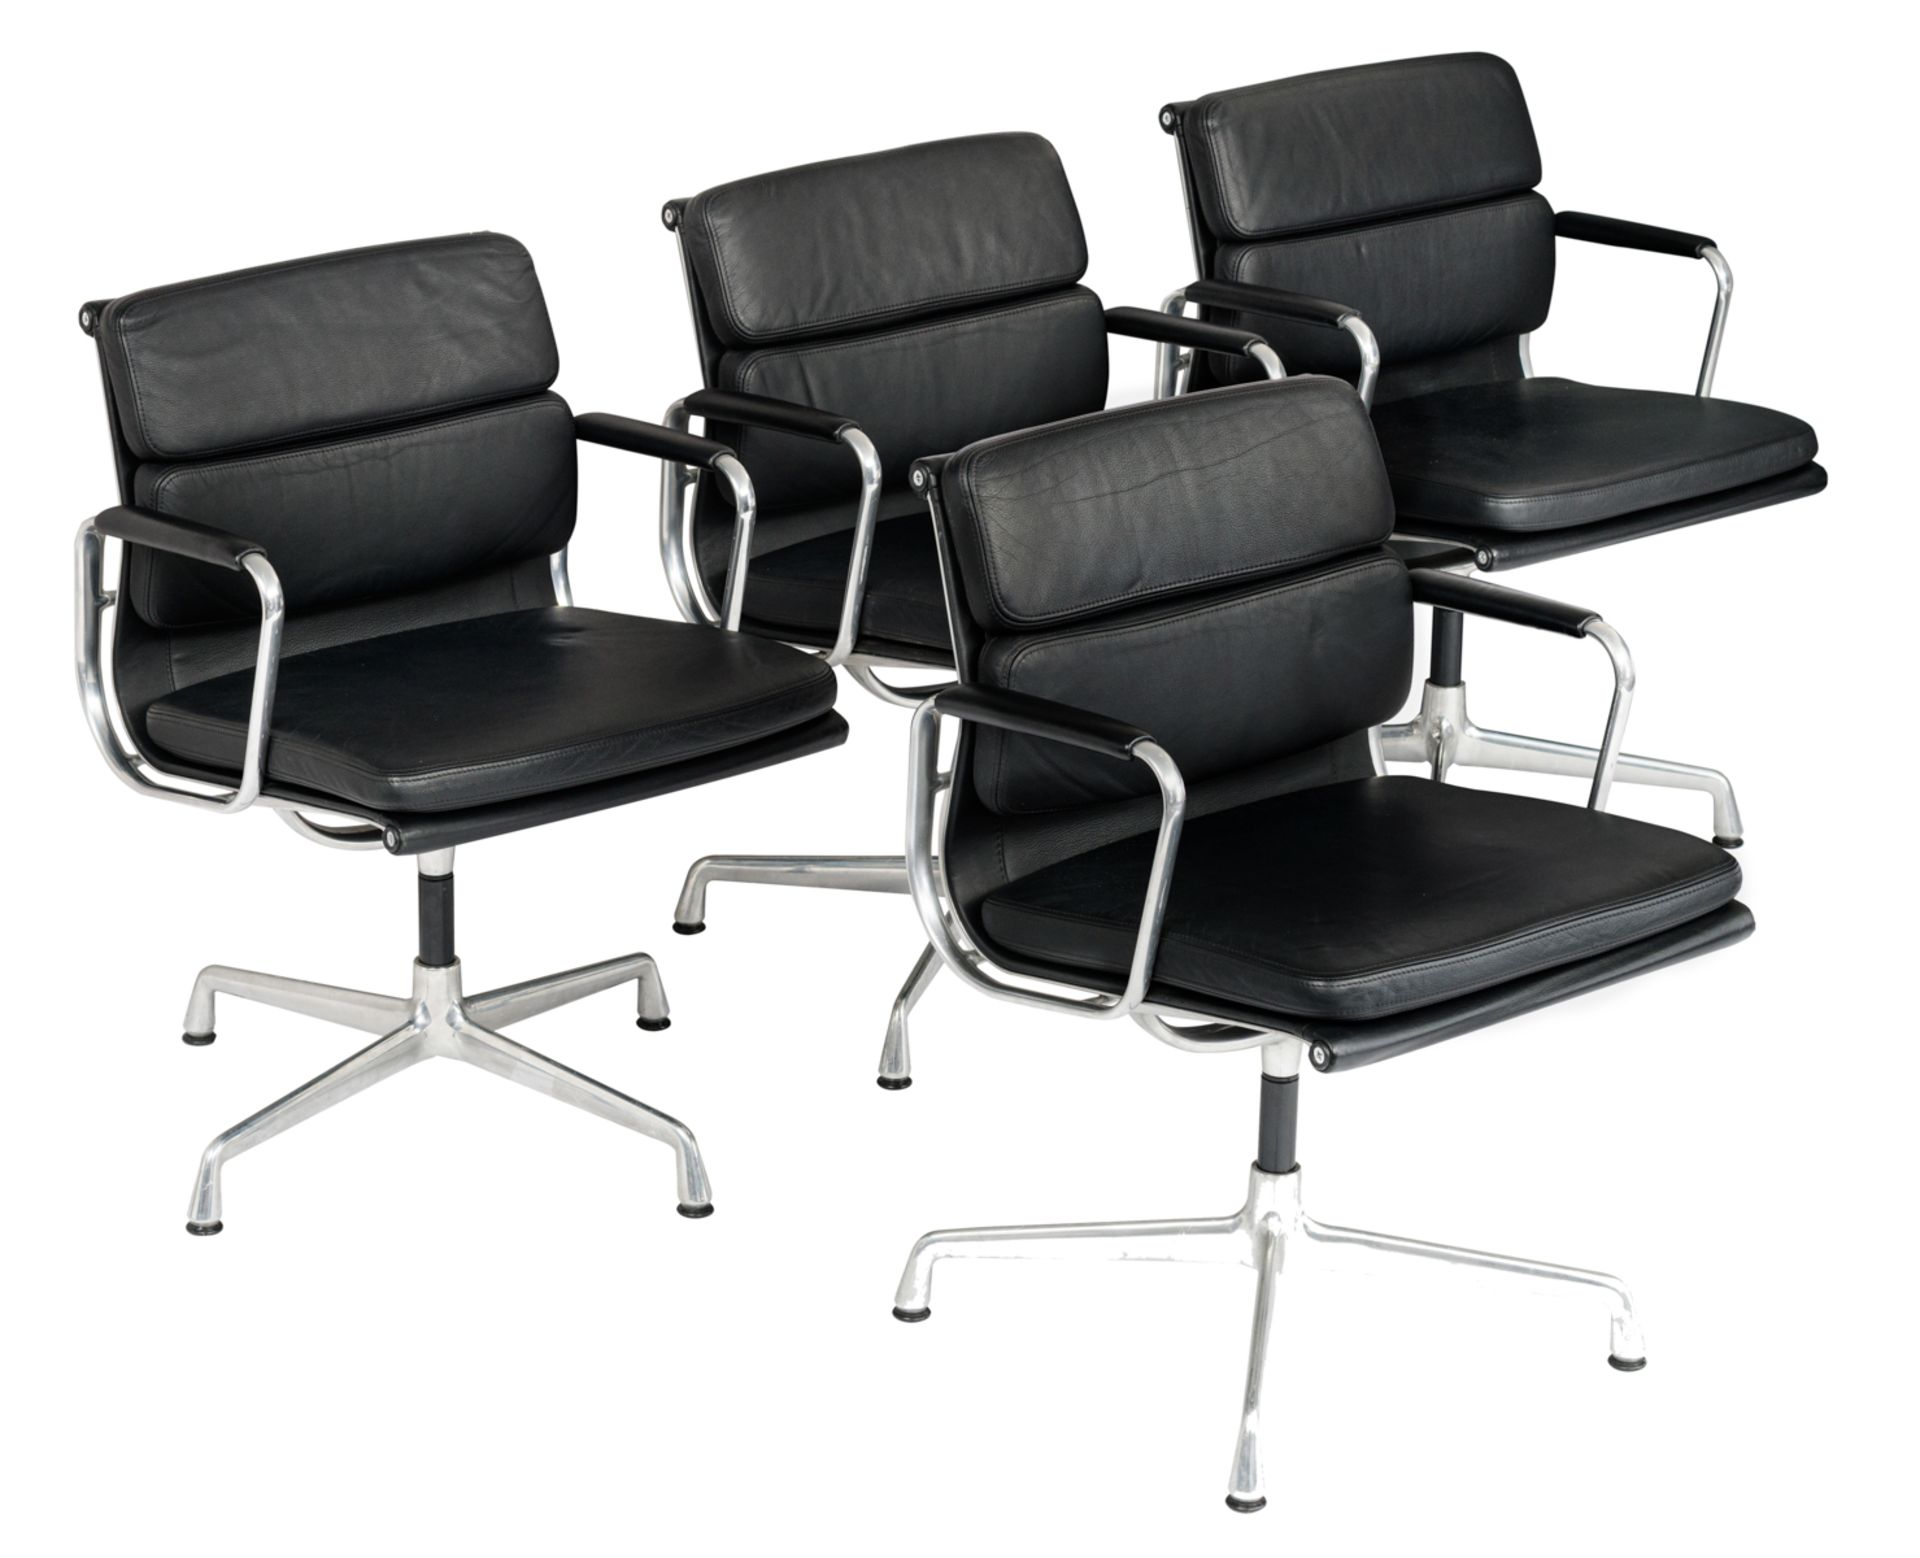 A set of four polished aluminium and black leather upholstered EA208 soft pad chairs, design by Char